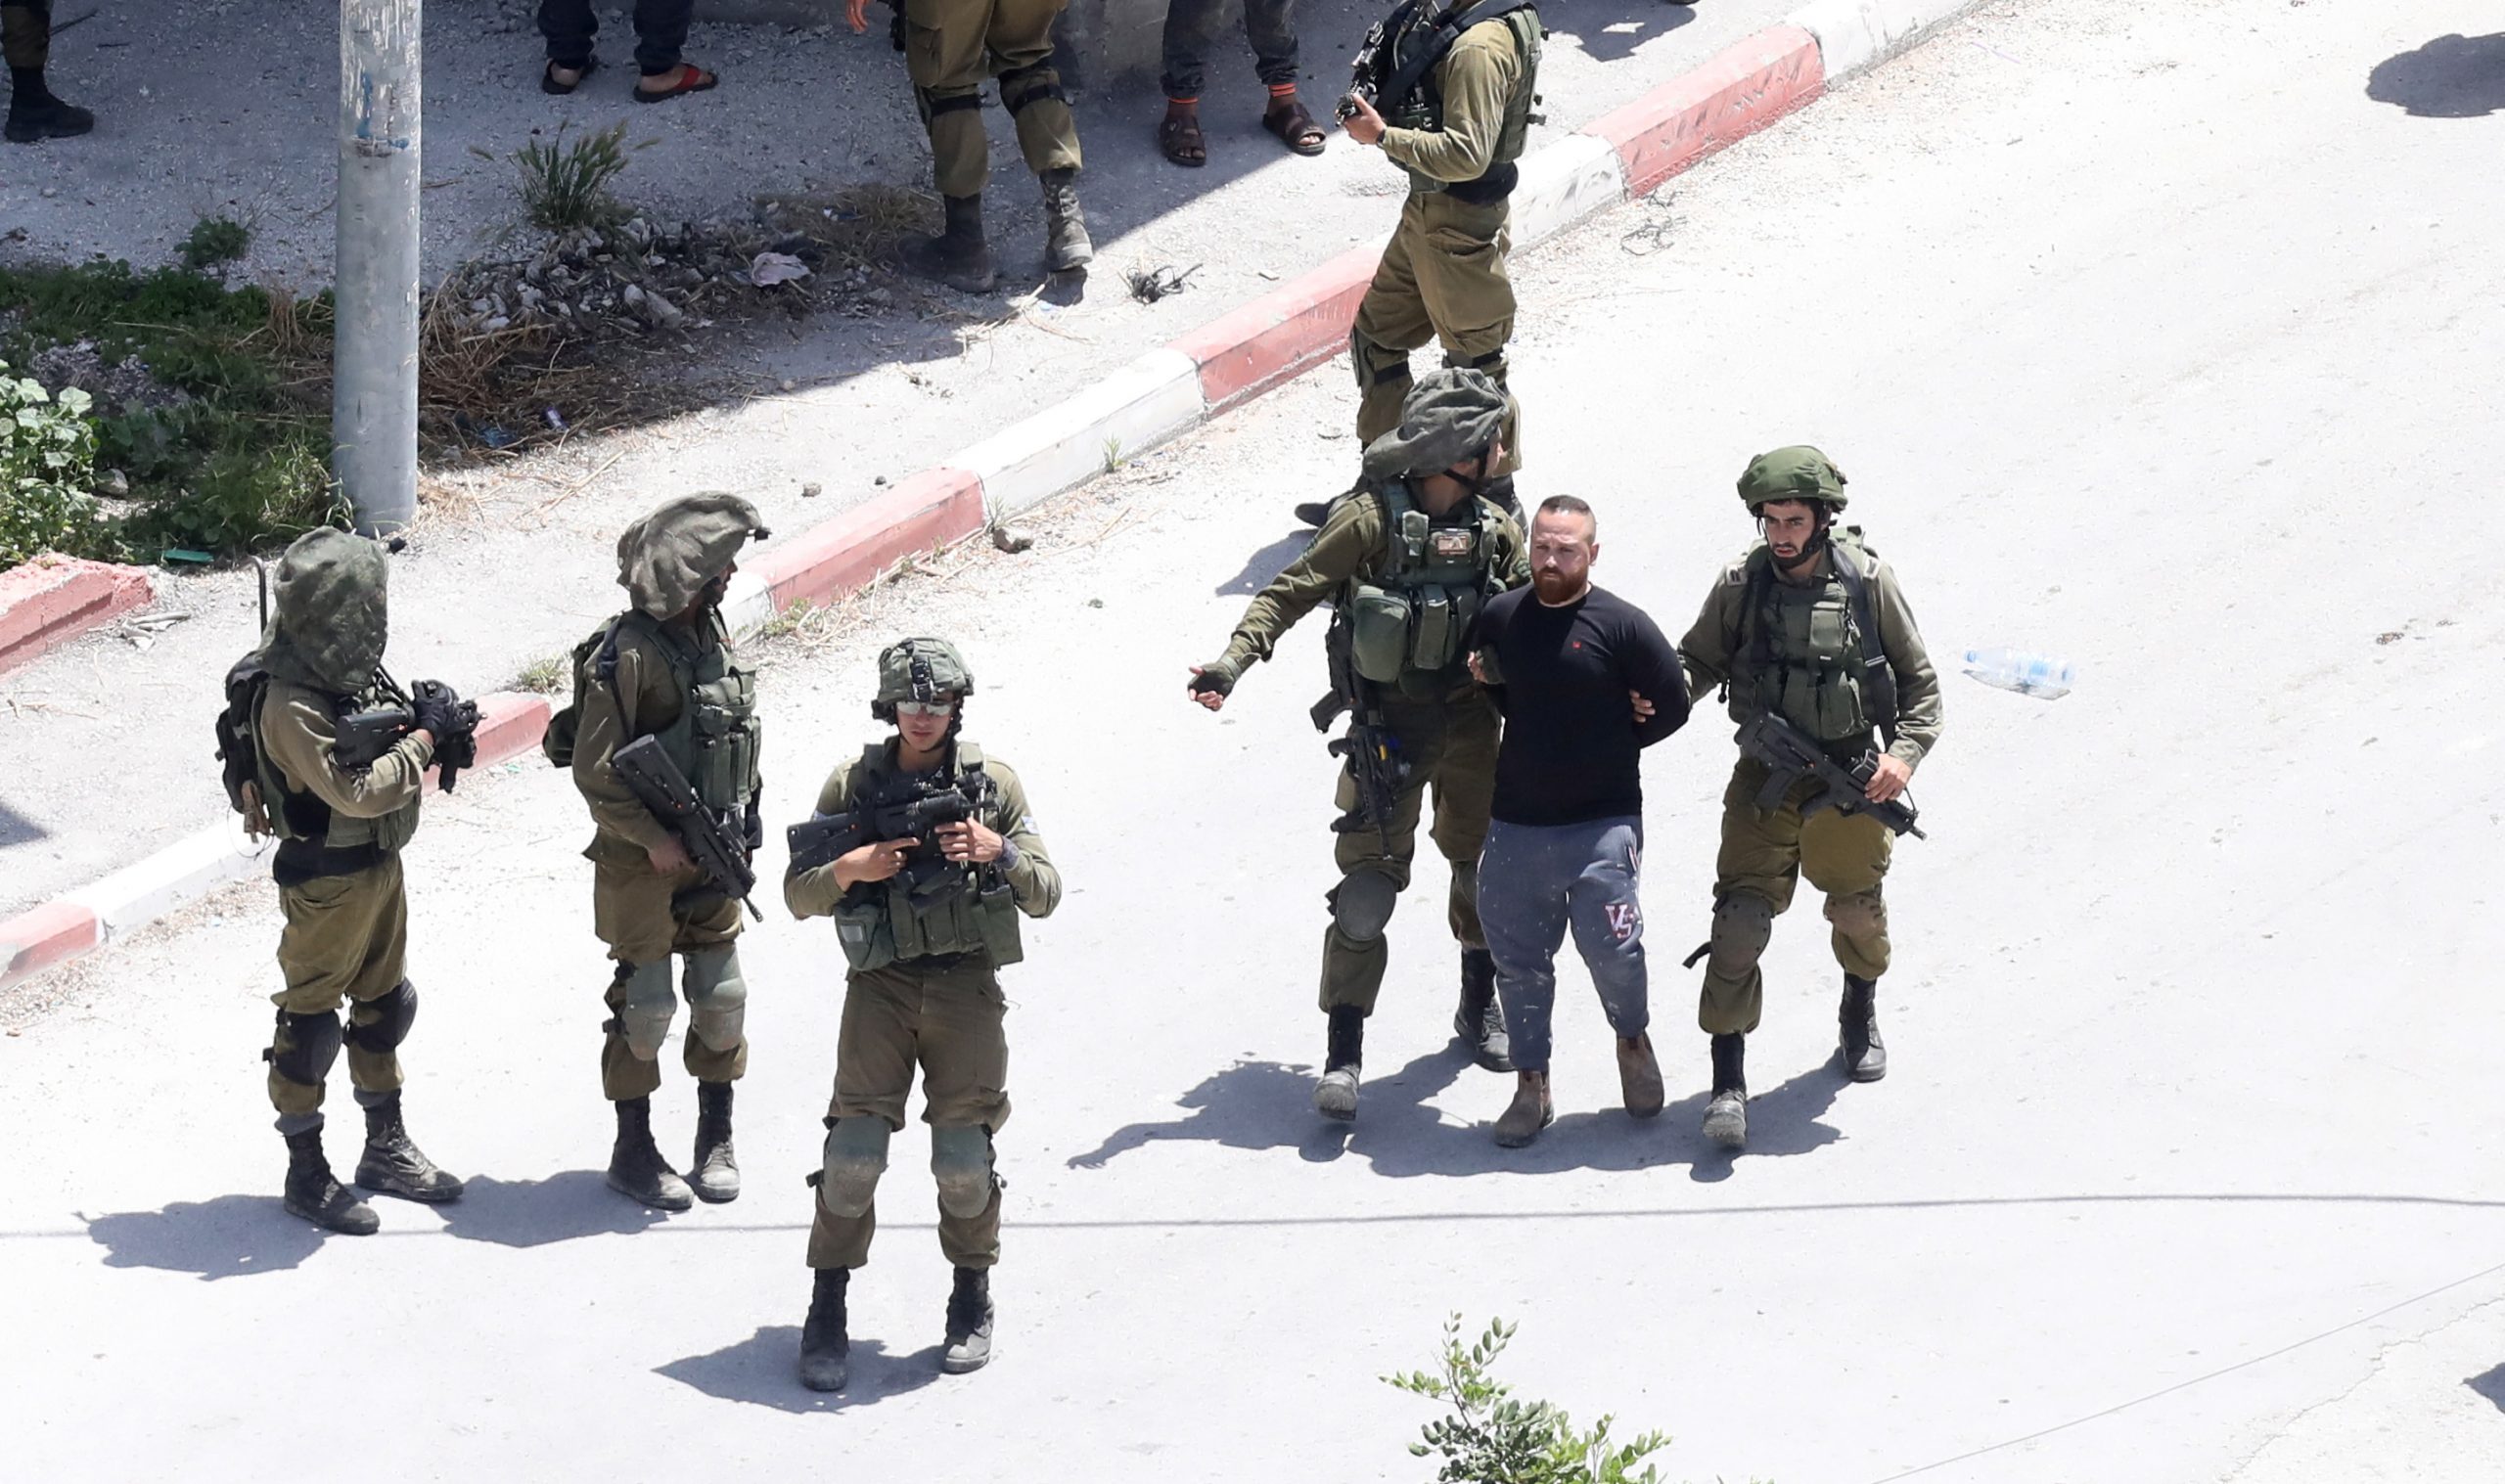 epa08416720 Israeli soldiers arrest a Palestinian during an Israeli army operation in the village of Yabad, near the West Bank City of Jenin, 12 May 2020. A soldier was killed on 12 May when a rock was dropped on his head during an operation in the West Bank, according to an Israeli military statement.  EPA/ALAA BADARNEH